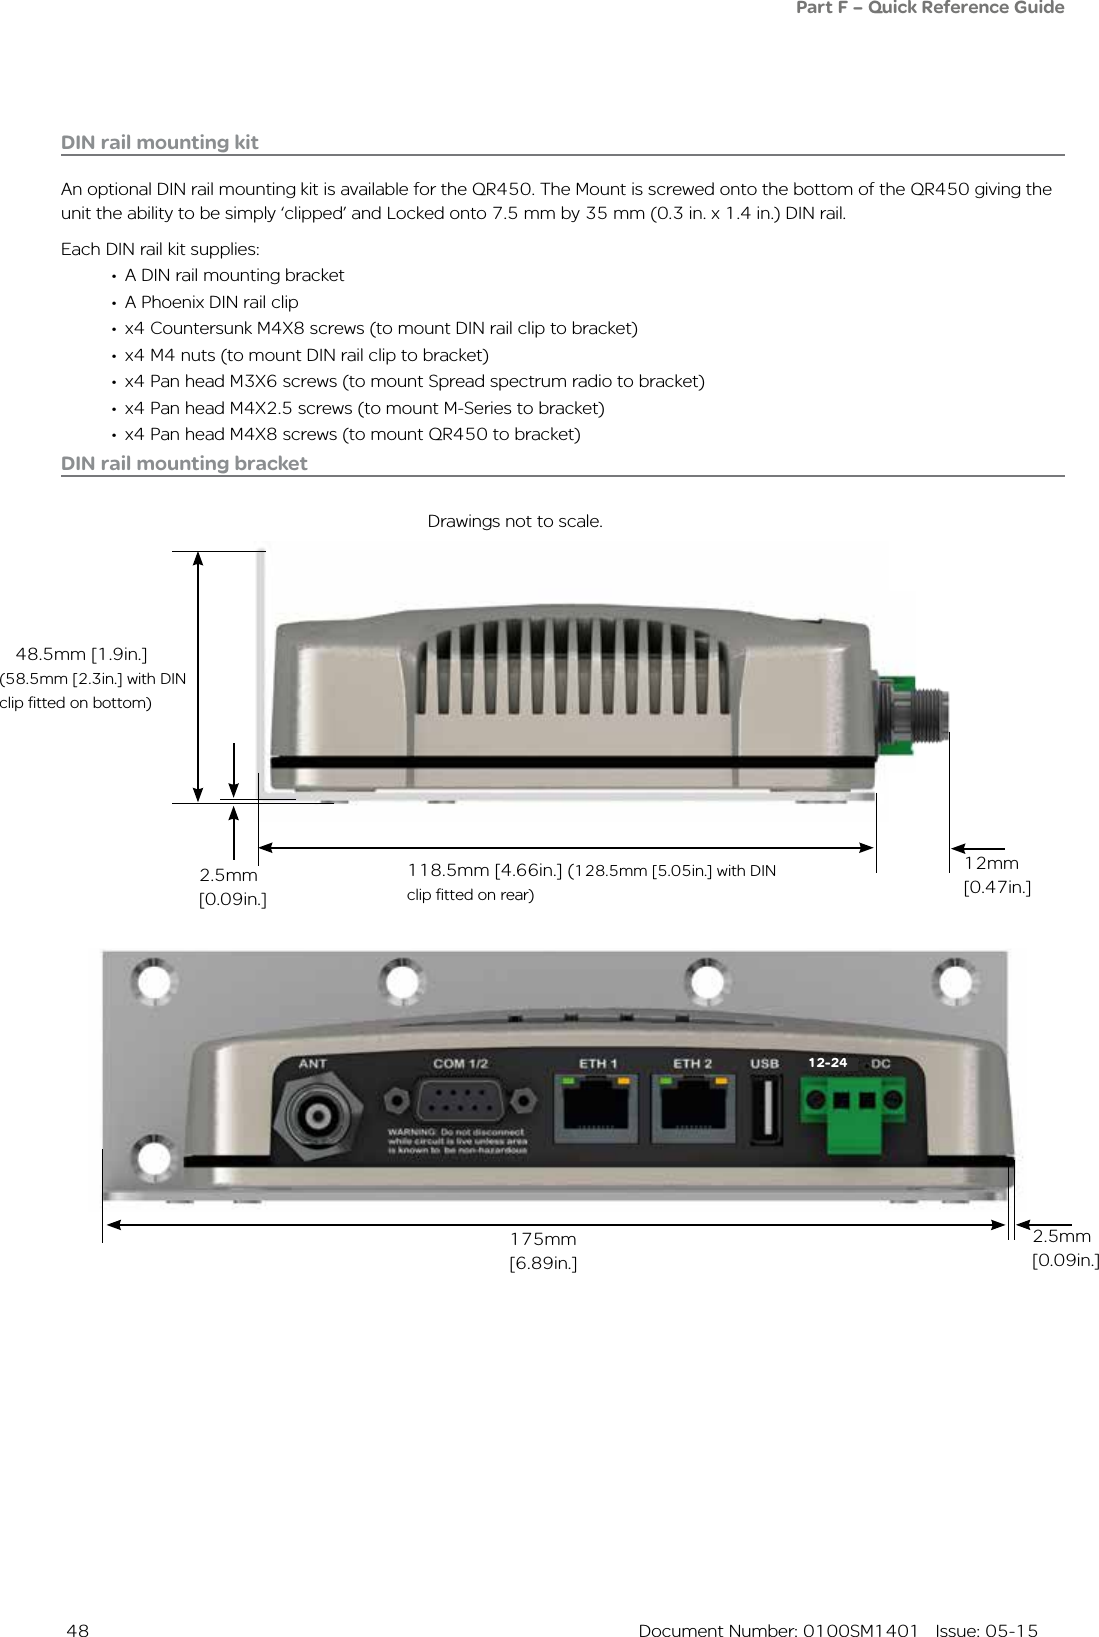  48  Document Number: 0100SM1401   Issue: 05-15DIN rail mounting kitAn optional DIN rail mounting kit is available for the QR450. The Mount is screwed onto the bottom of the QR450 giving the unit the ability to be simply ‘clipped’ and Locked onto 7.5 mm by 35 mm (0.3 in. x 1.4 in.) DIN rail.Each DIN rail kit supplies:•  A DIN rail mounting bracket•  A Phoenix DIN rail clip•  x4 Countersunk M4X8 screws (to mount DIN rail clip to bracket)•  x4 M4 nuts (to mount DIN rail clip to bracket)•  x4 Pan head M3X6 screws (to mount Spread spectrum radio to bracket)•  x4 Pan head M4X2.5 screws (to mount M-Series to bracket)•  x4 Pan head M4X8 screws (to mount QR450 to bracket)Drawings not to scale.118.5mm [4.66in.] (128.5mm [5.05in.] with DIN clip fitted on rear)12mm [0.47in.]2.5mm [0.09in.]48.5mm [1.9in.]175mm [6.89in.]DIN rail mounting bracket(58.5mm [2.3in.] with DIN clip fitted on bottom)Part F – Quick Reference Guide 2.5mm [0.09in.]12-24